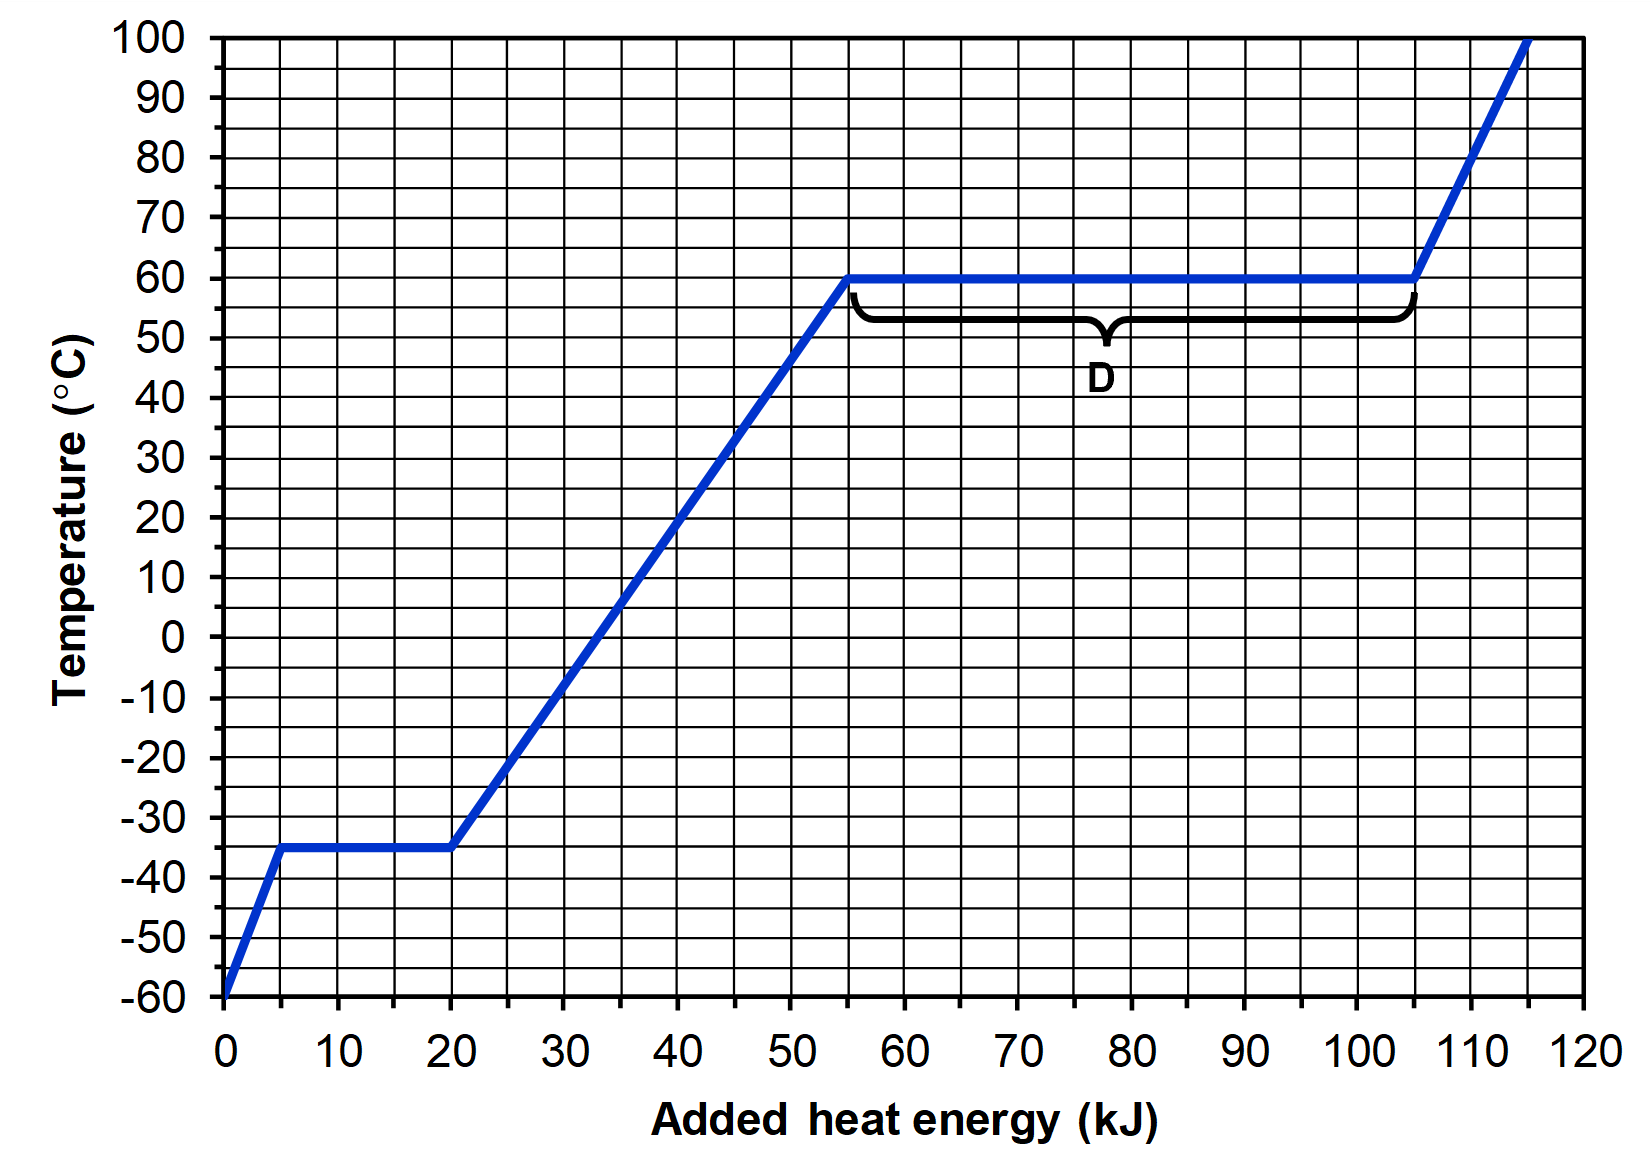 Heating curve of compound X is shown. The curve goes up linearly from (0 kJ, -60°C) to (5 kJ, -35°C). It then remains flat from (5 kJ, -35°C) to (20 kJ, -35°C). It then increases linearly from (20 kJ, -35°C) to (55 kJ, 60°C). It then remains flat from (55 kJ, 60°C) to (105 kJ, 60°C); this region is marked as D. It then increases linearly from (105 kJ, 60°C) to (115 kJ, 100°C).